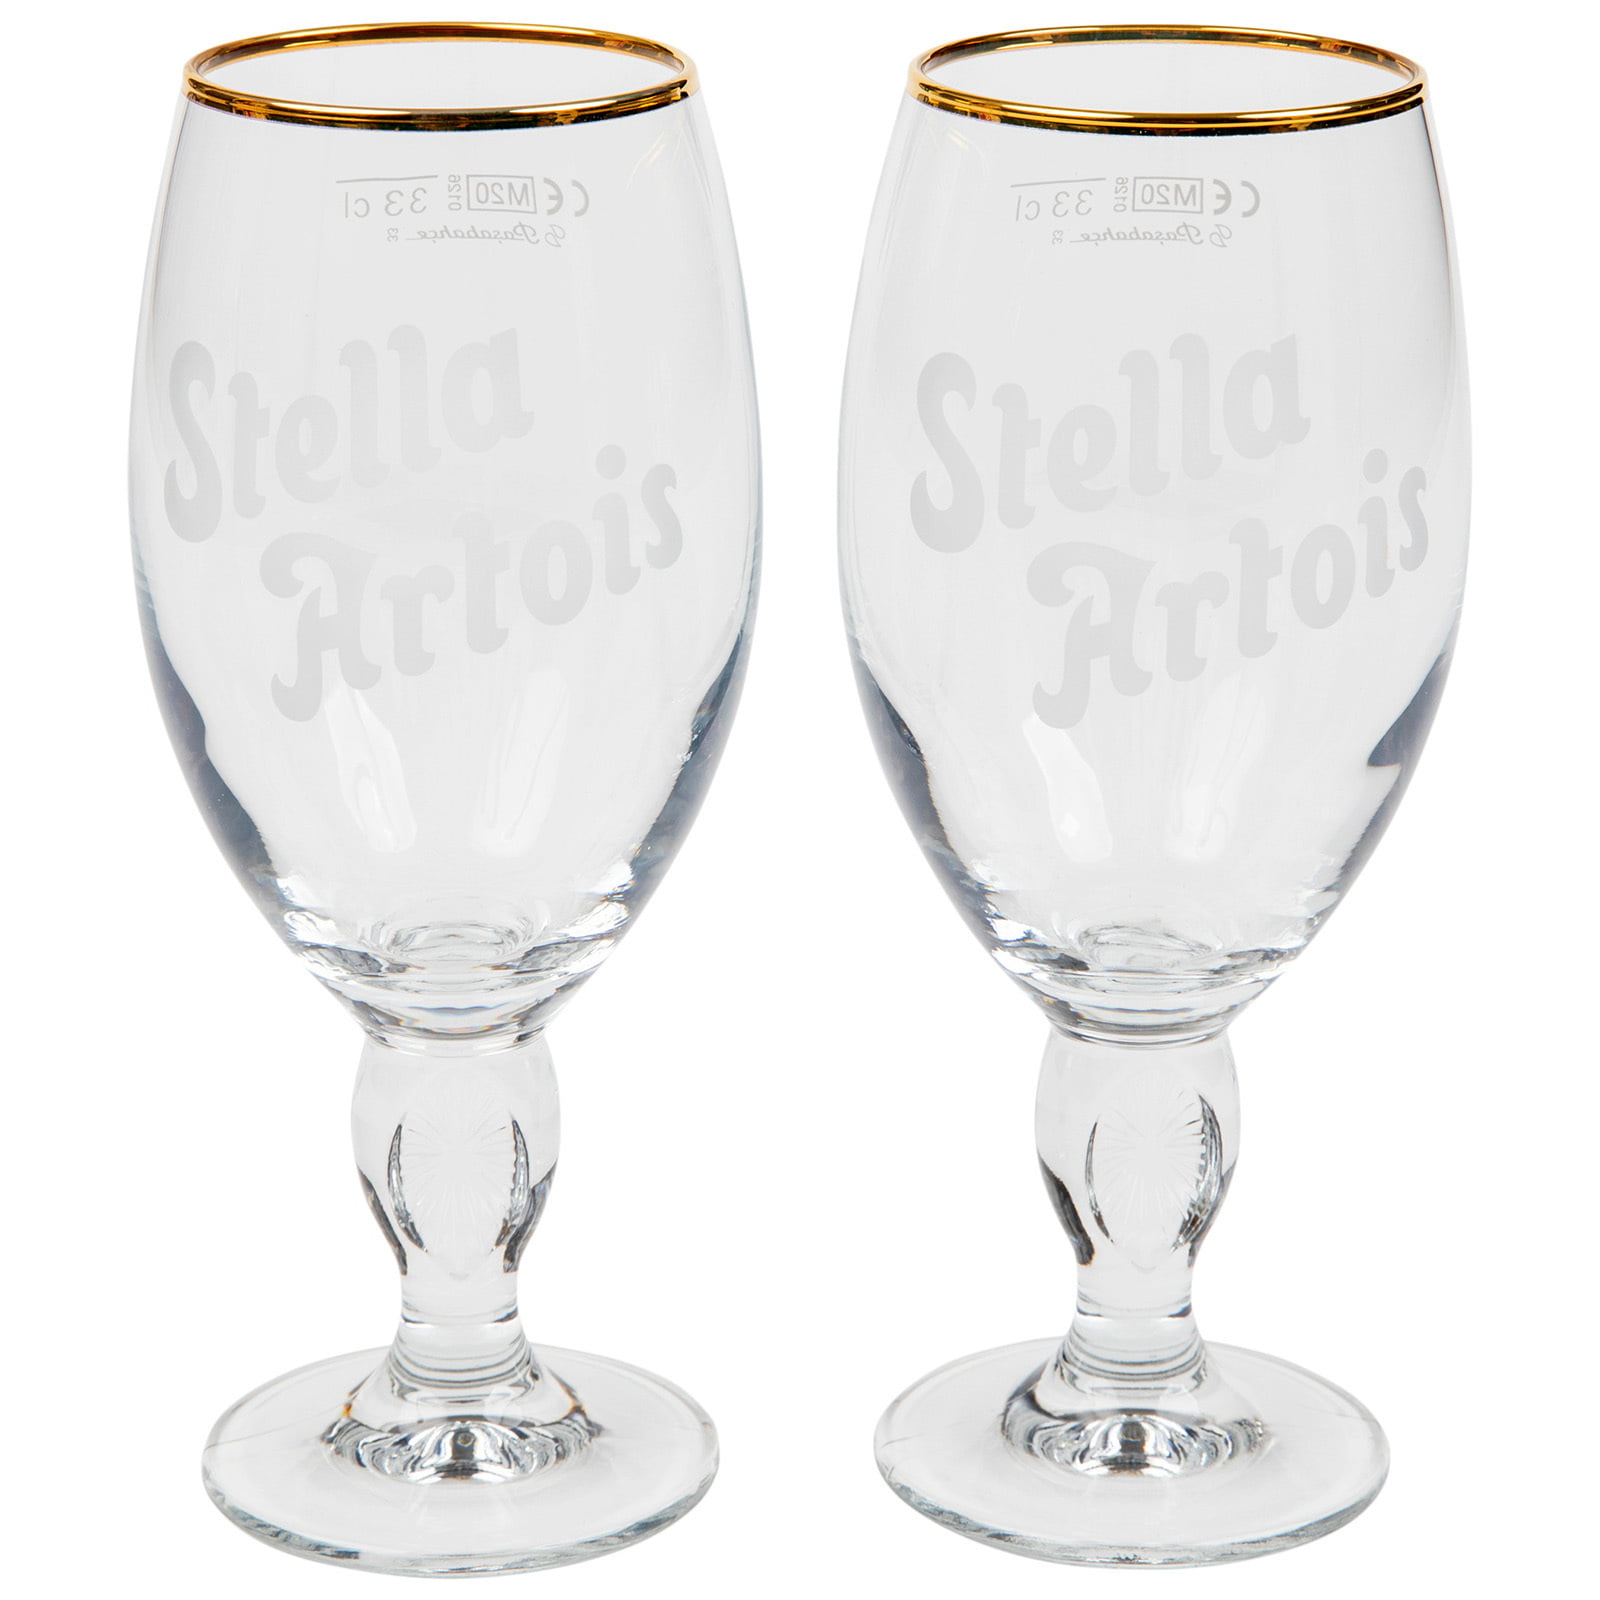 Stella Artois Glass Belgium Beer 33 cl Glass Chalice New & F/S Set of Two 2 